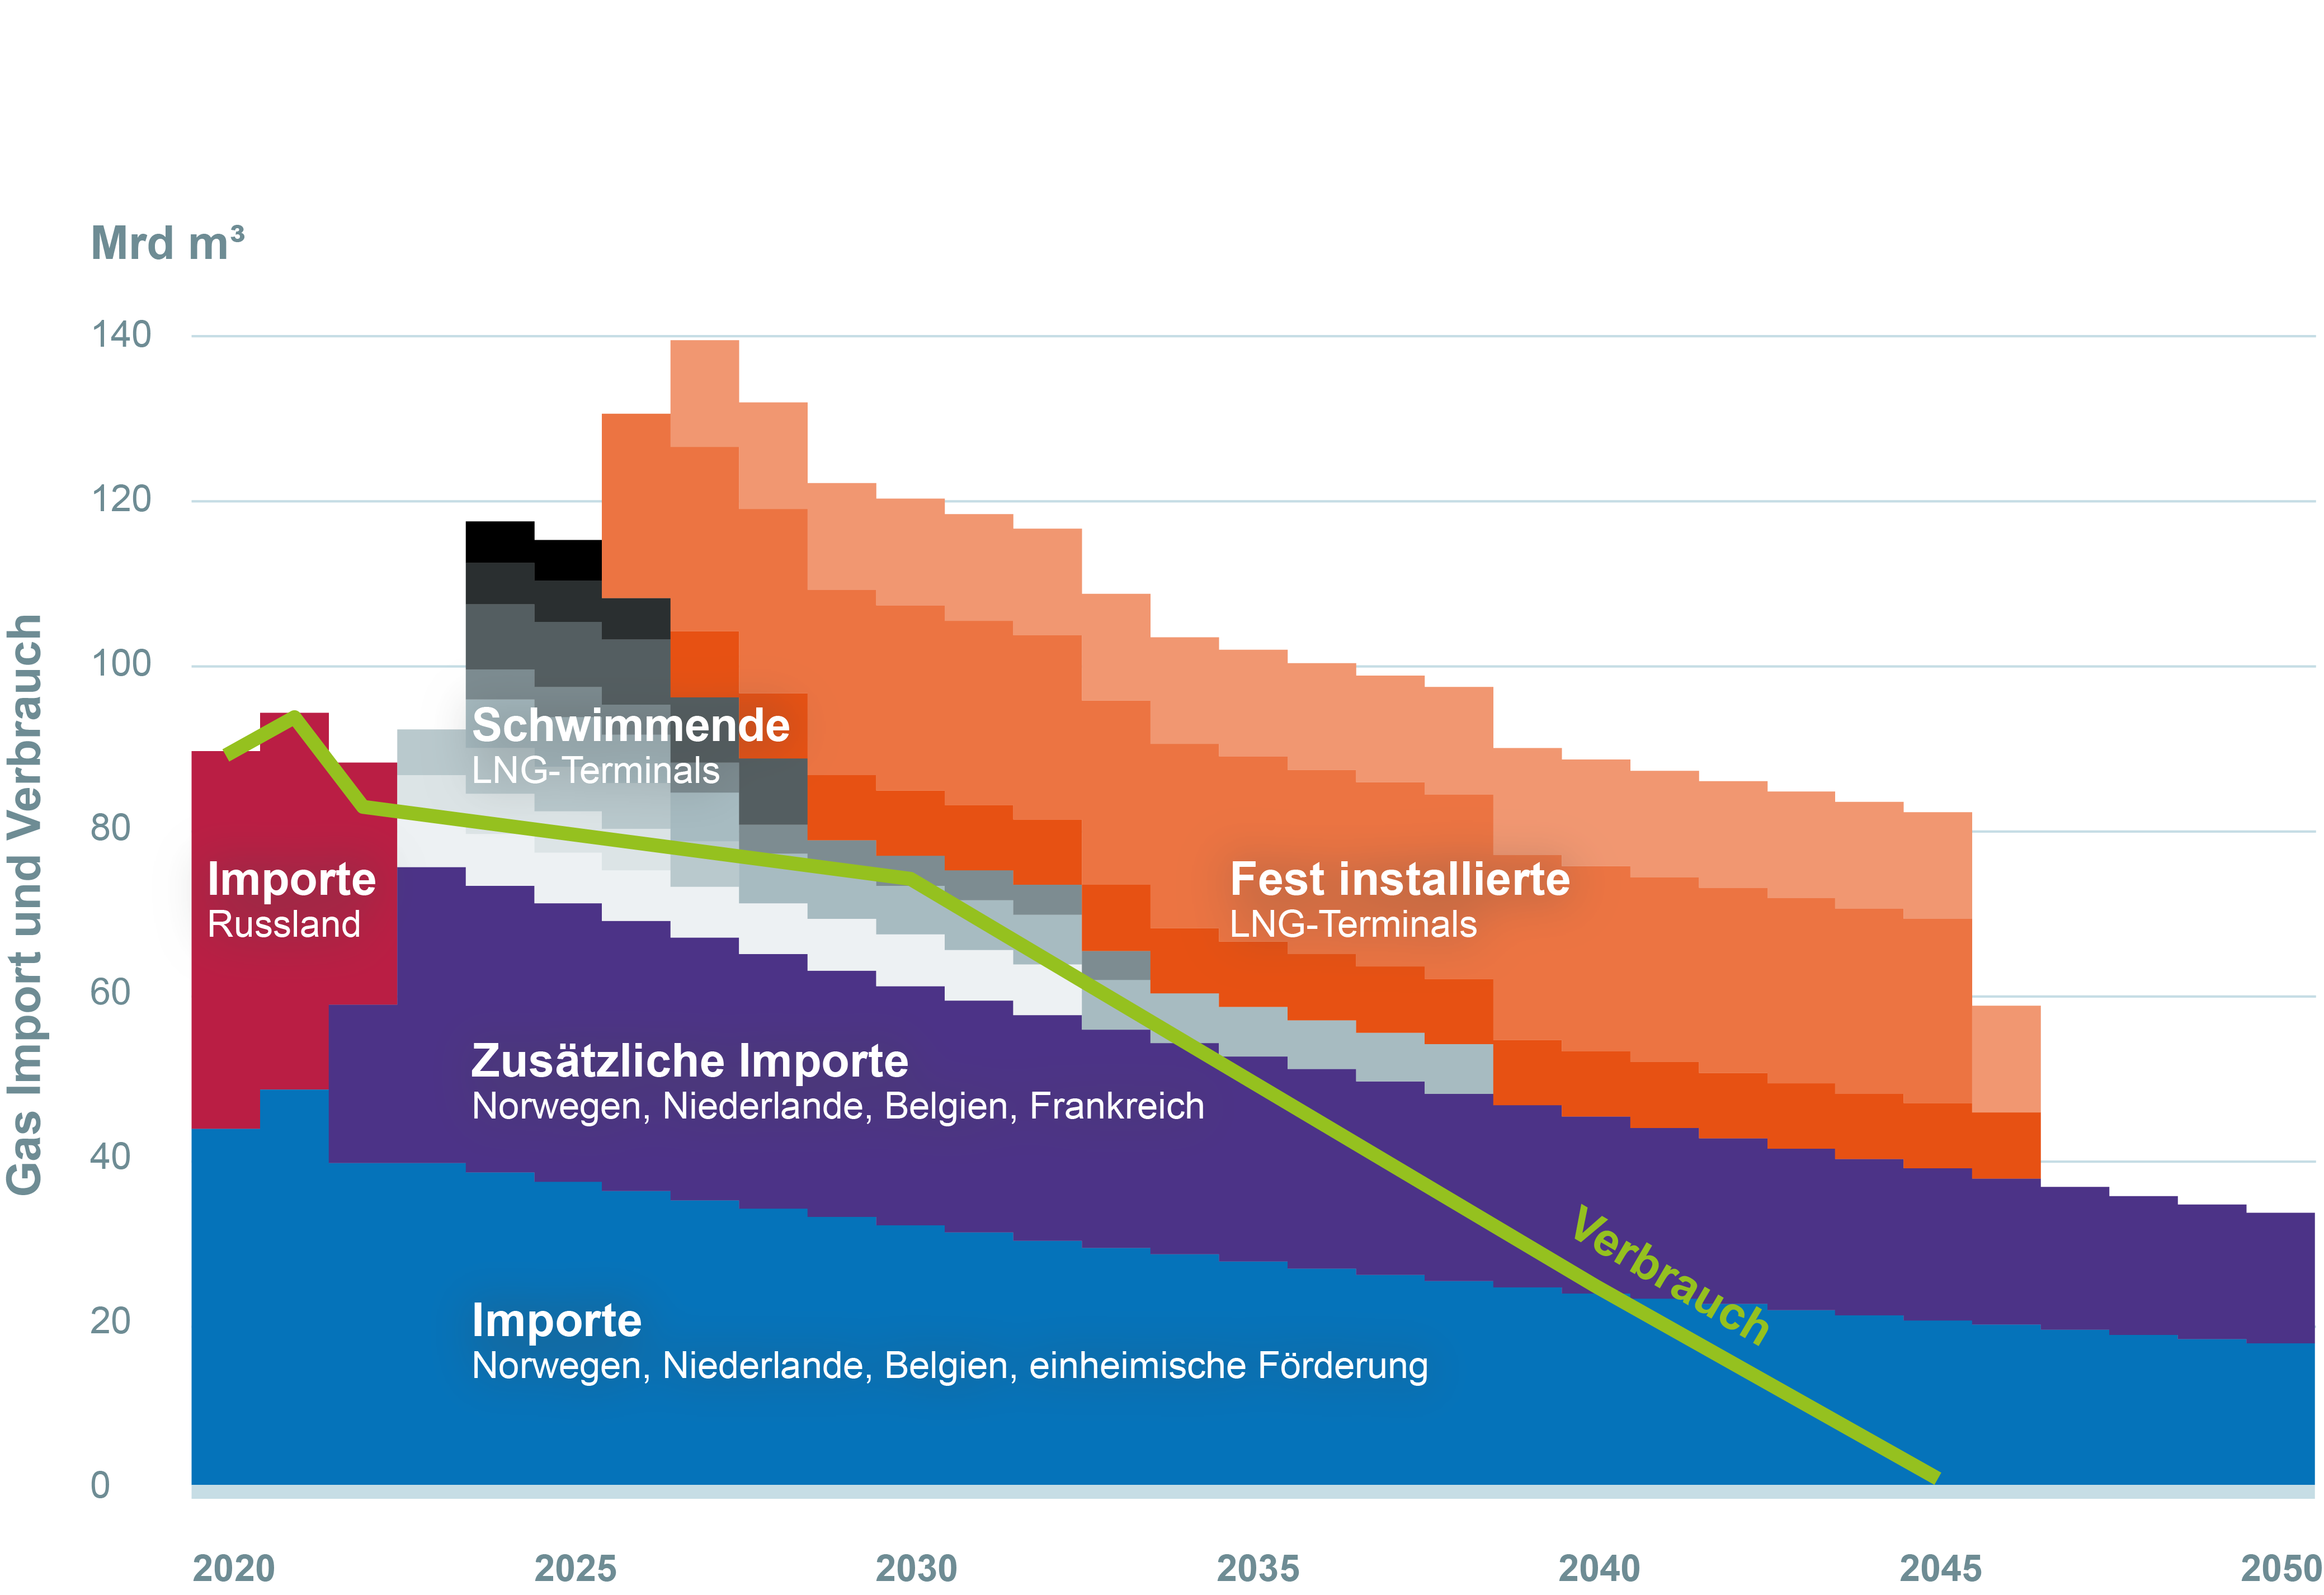 The graphic shows gas imports and use in Germany from 2020 to 2050. One data series shows the gas use under the climate neutrality 2045 pathway. The remaining data series show import capacities from various sources. Cumulative, these sources exceed by far the pathway for gas use.